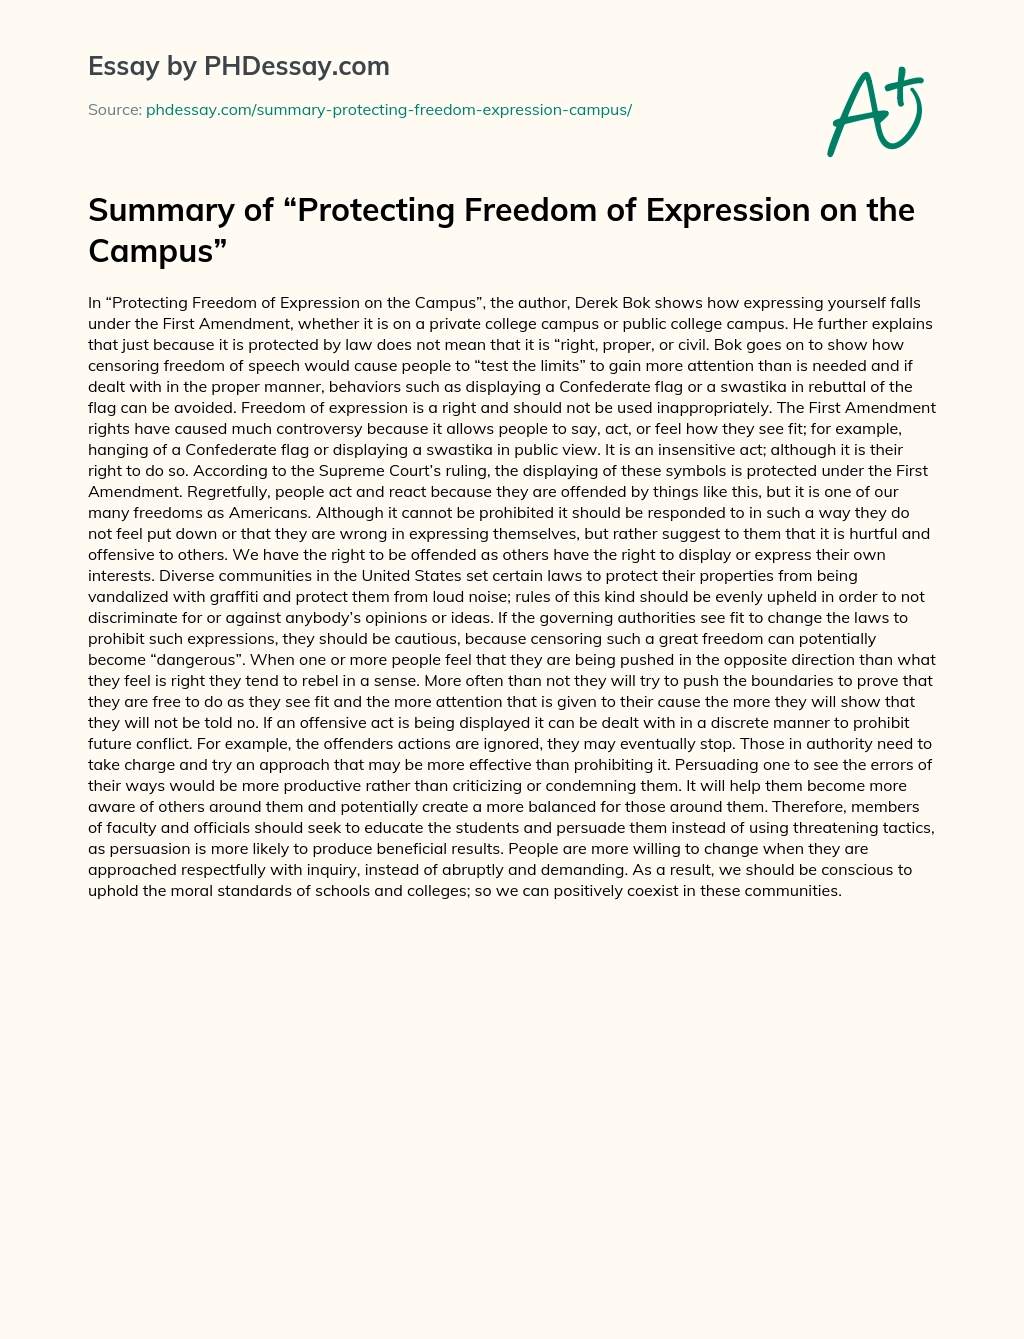 Summary of “Protecting Freedom of Expression on the Campus” essay